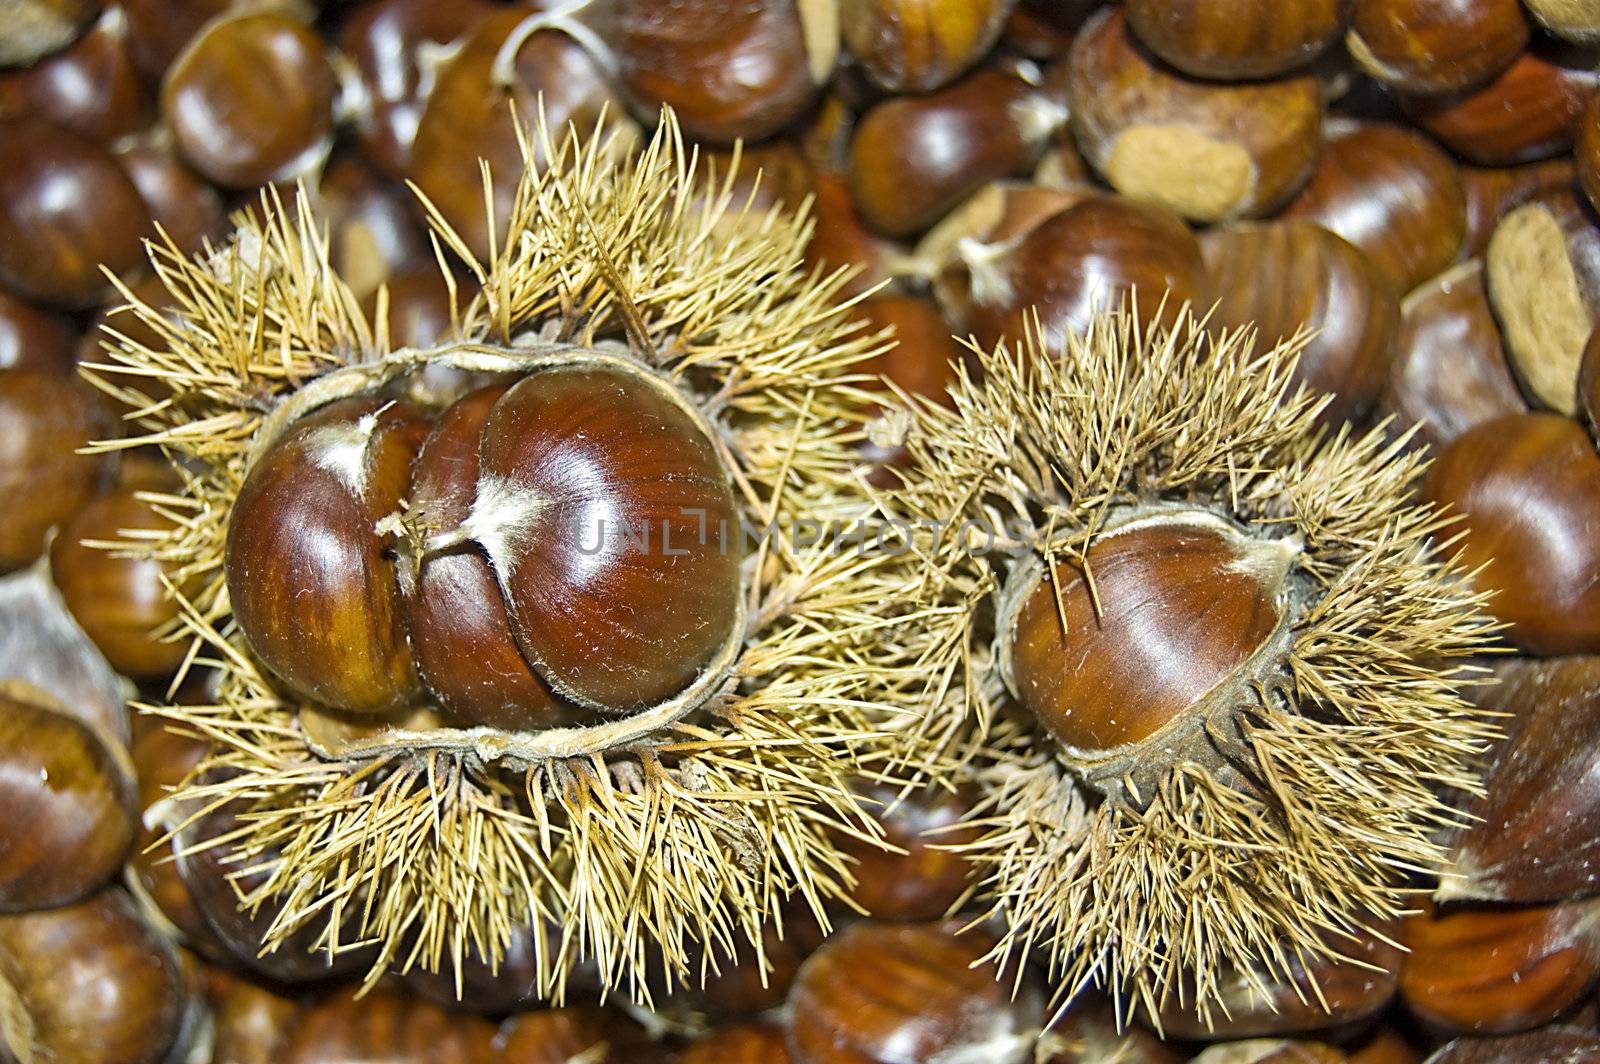 Group of chestnuts and two with husk